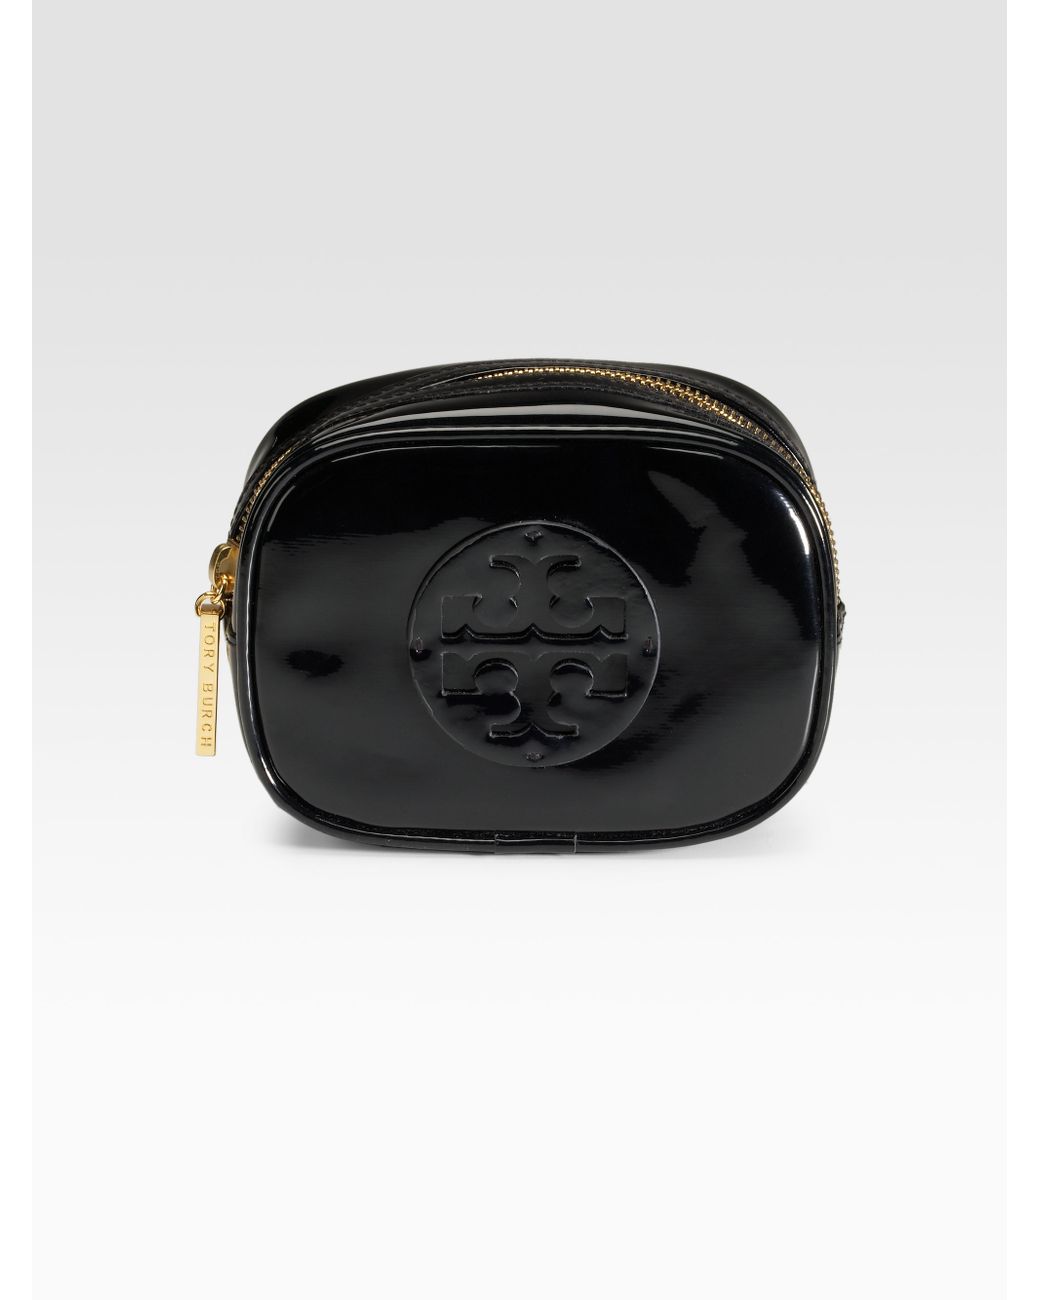 Tory Burch Patent Leather Cosmetic Bag in Black | Lyst